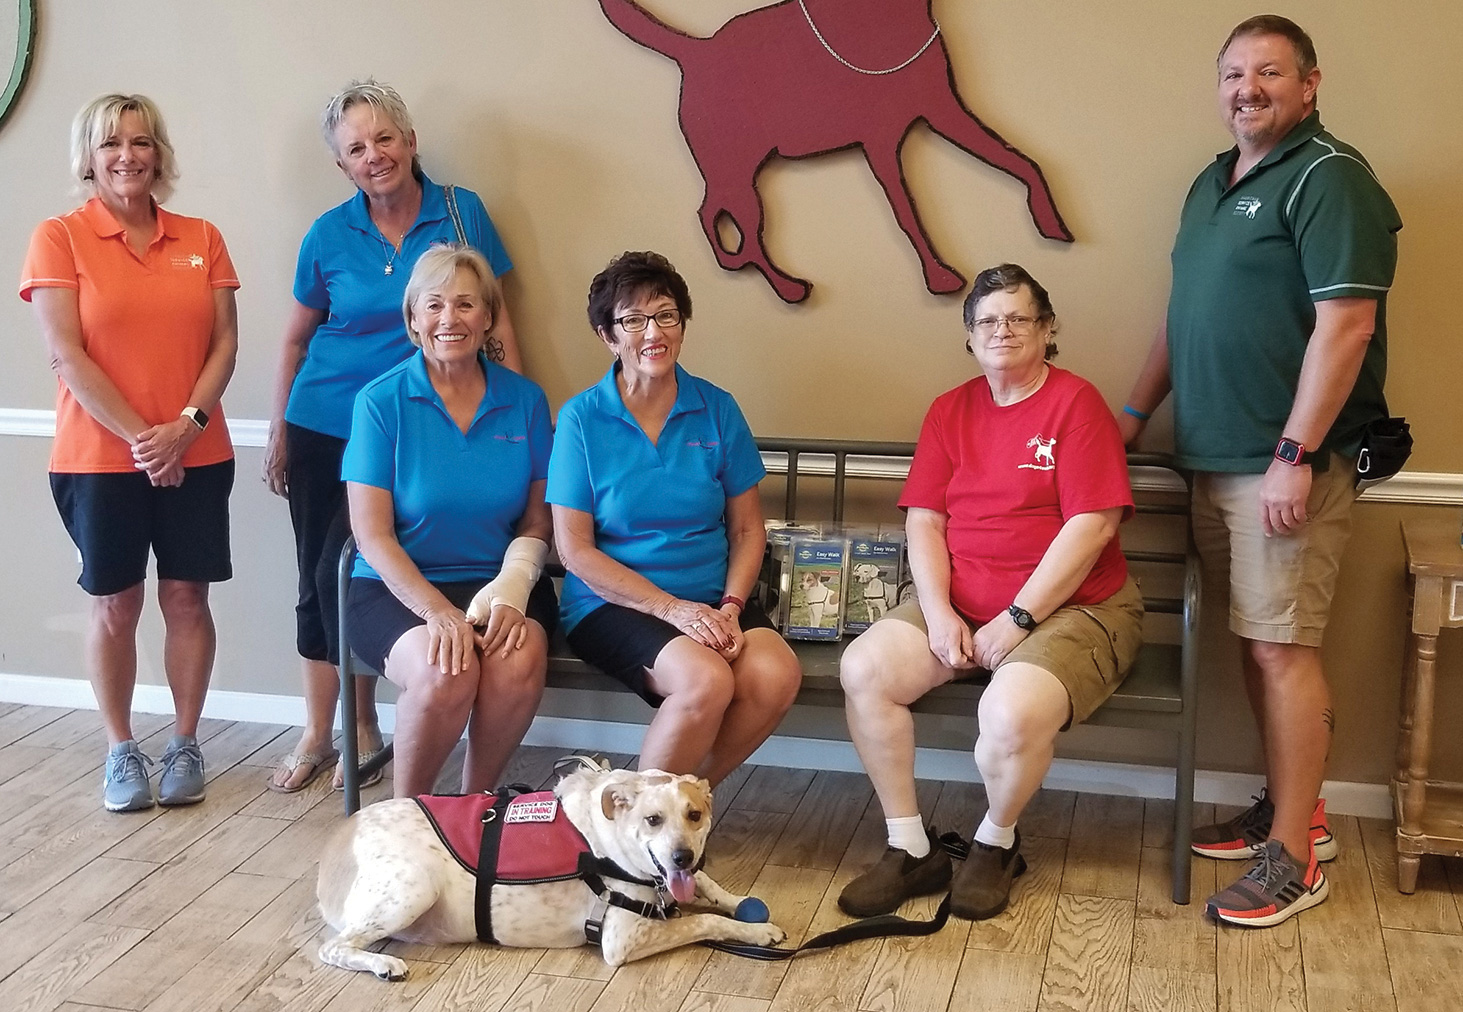 Left to right: Diane Van Compernolle, assistant trainer; committee members Val Verbeck, Mary Horn, and Judy Daidone; Sun Lakes resident Diane Holowinski and her dog Buddy; Shaun Claseman, executive director